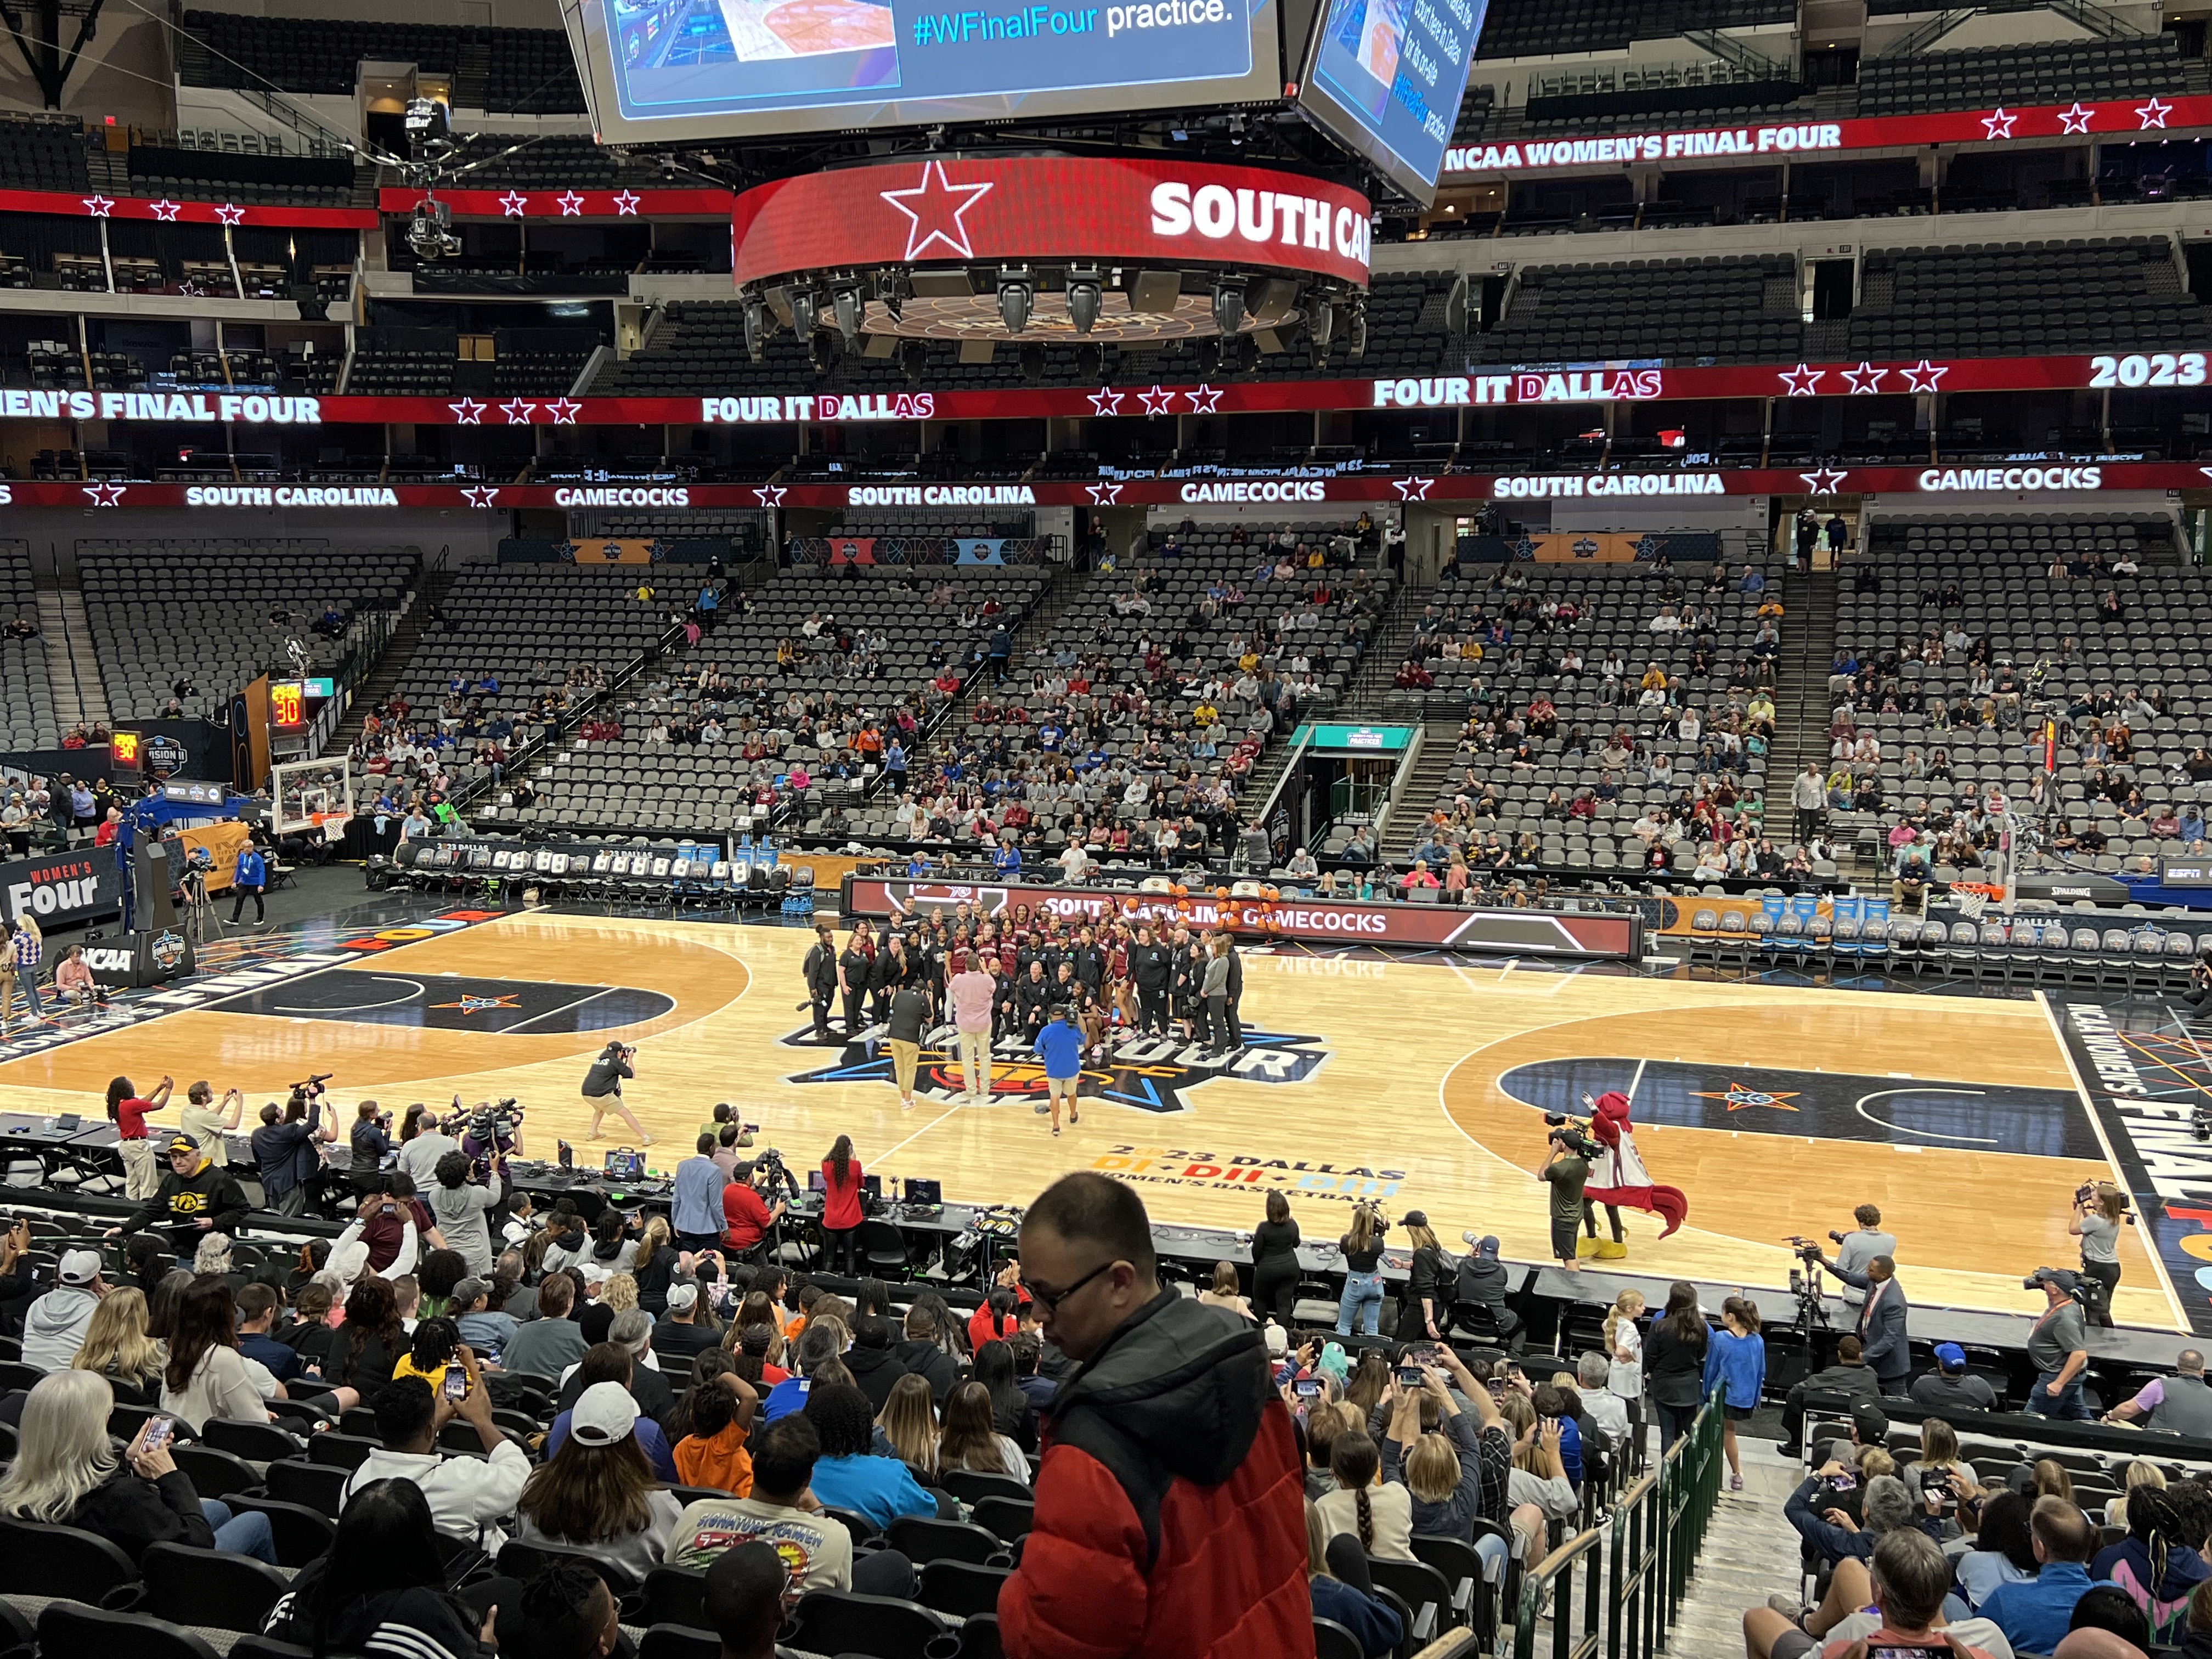 My (6) Biggest Takeaways From the Women's Final 4 and WBCA Convention